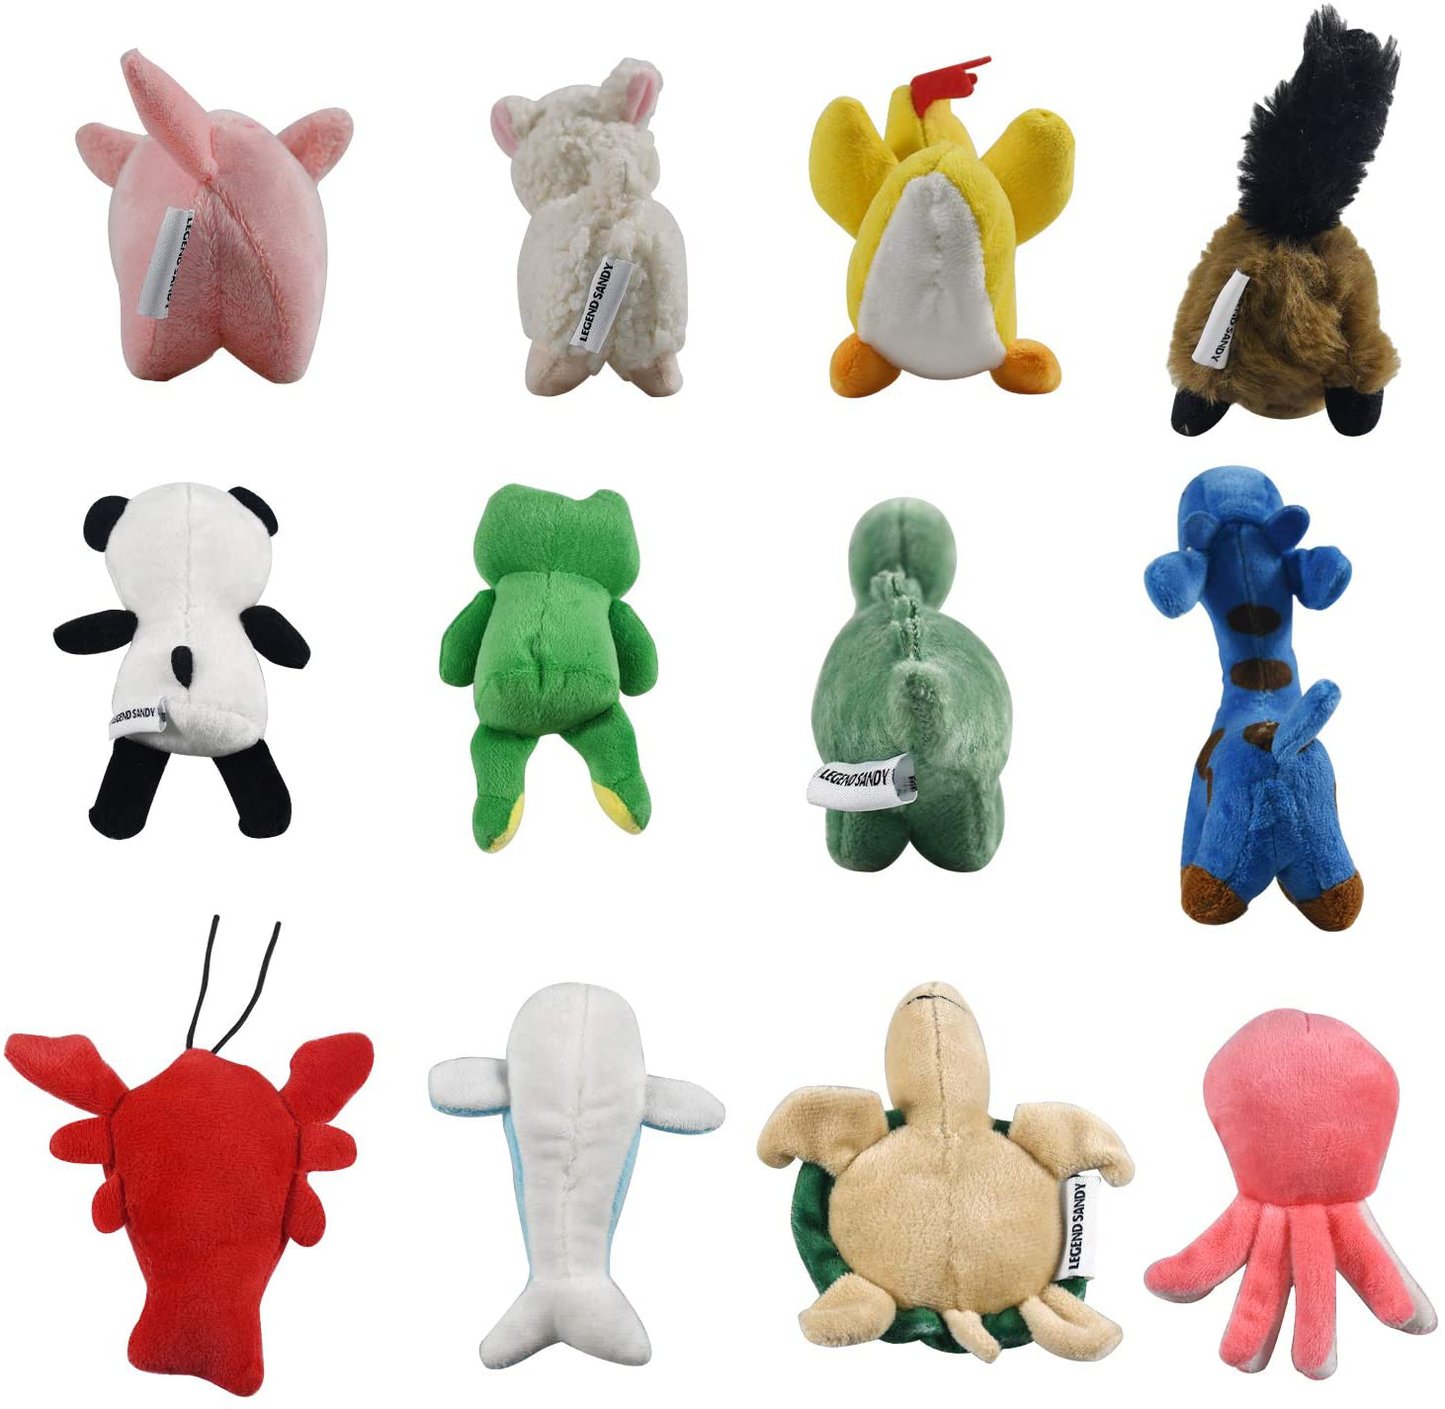 Squeaky Plush Dog Toy Pack for Puppy, Small Stuffed Puppy Chew Toys 12 Dog Toys Bulk with Squeakers, Cute Soft Pet Toy for Small Medium Size Dogs Animals & Pet Supplies > Pet Supplies > Dog Supplies > Dog Toys LEGEND SANDY   